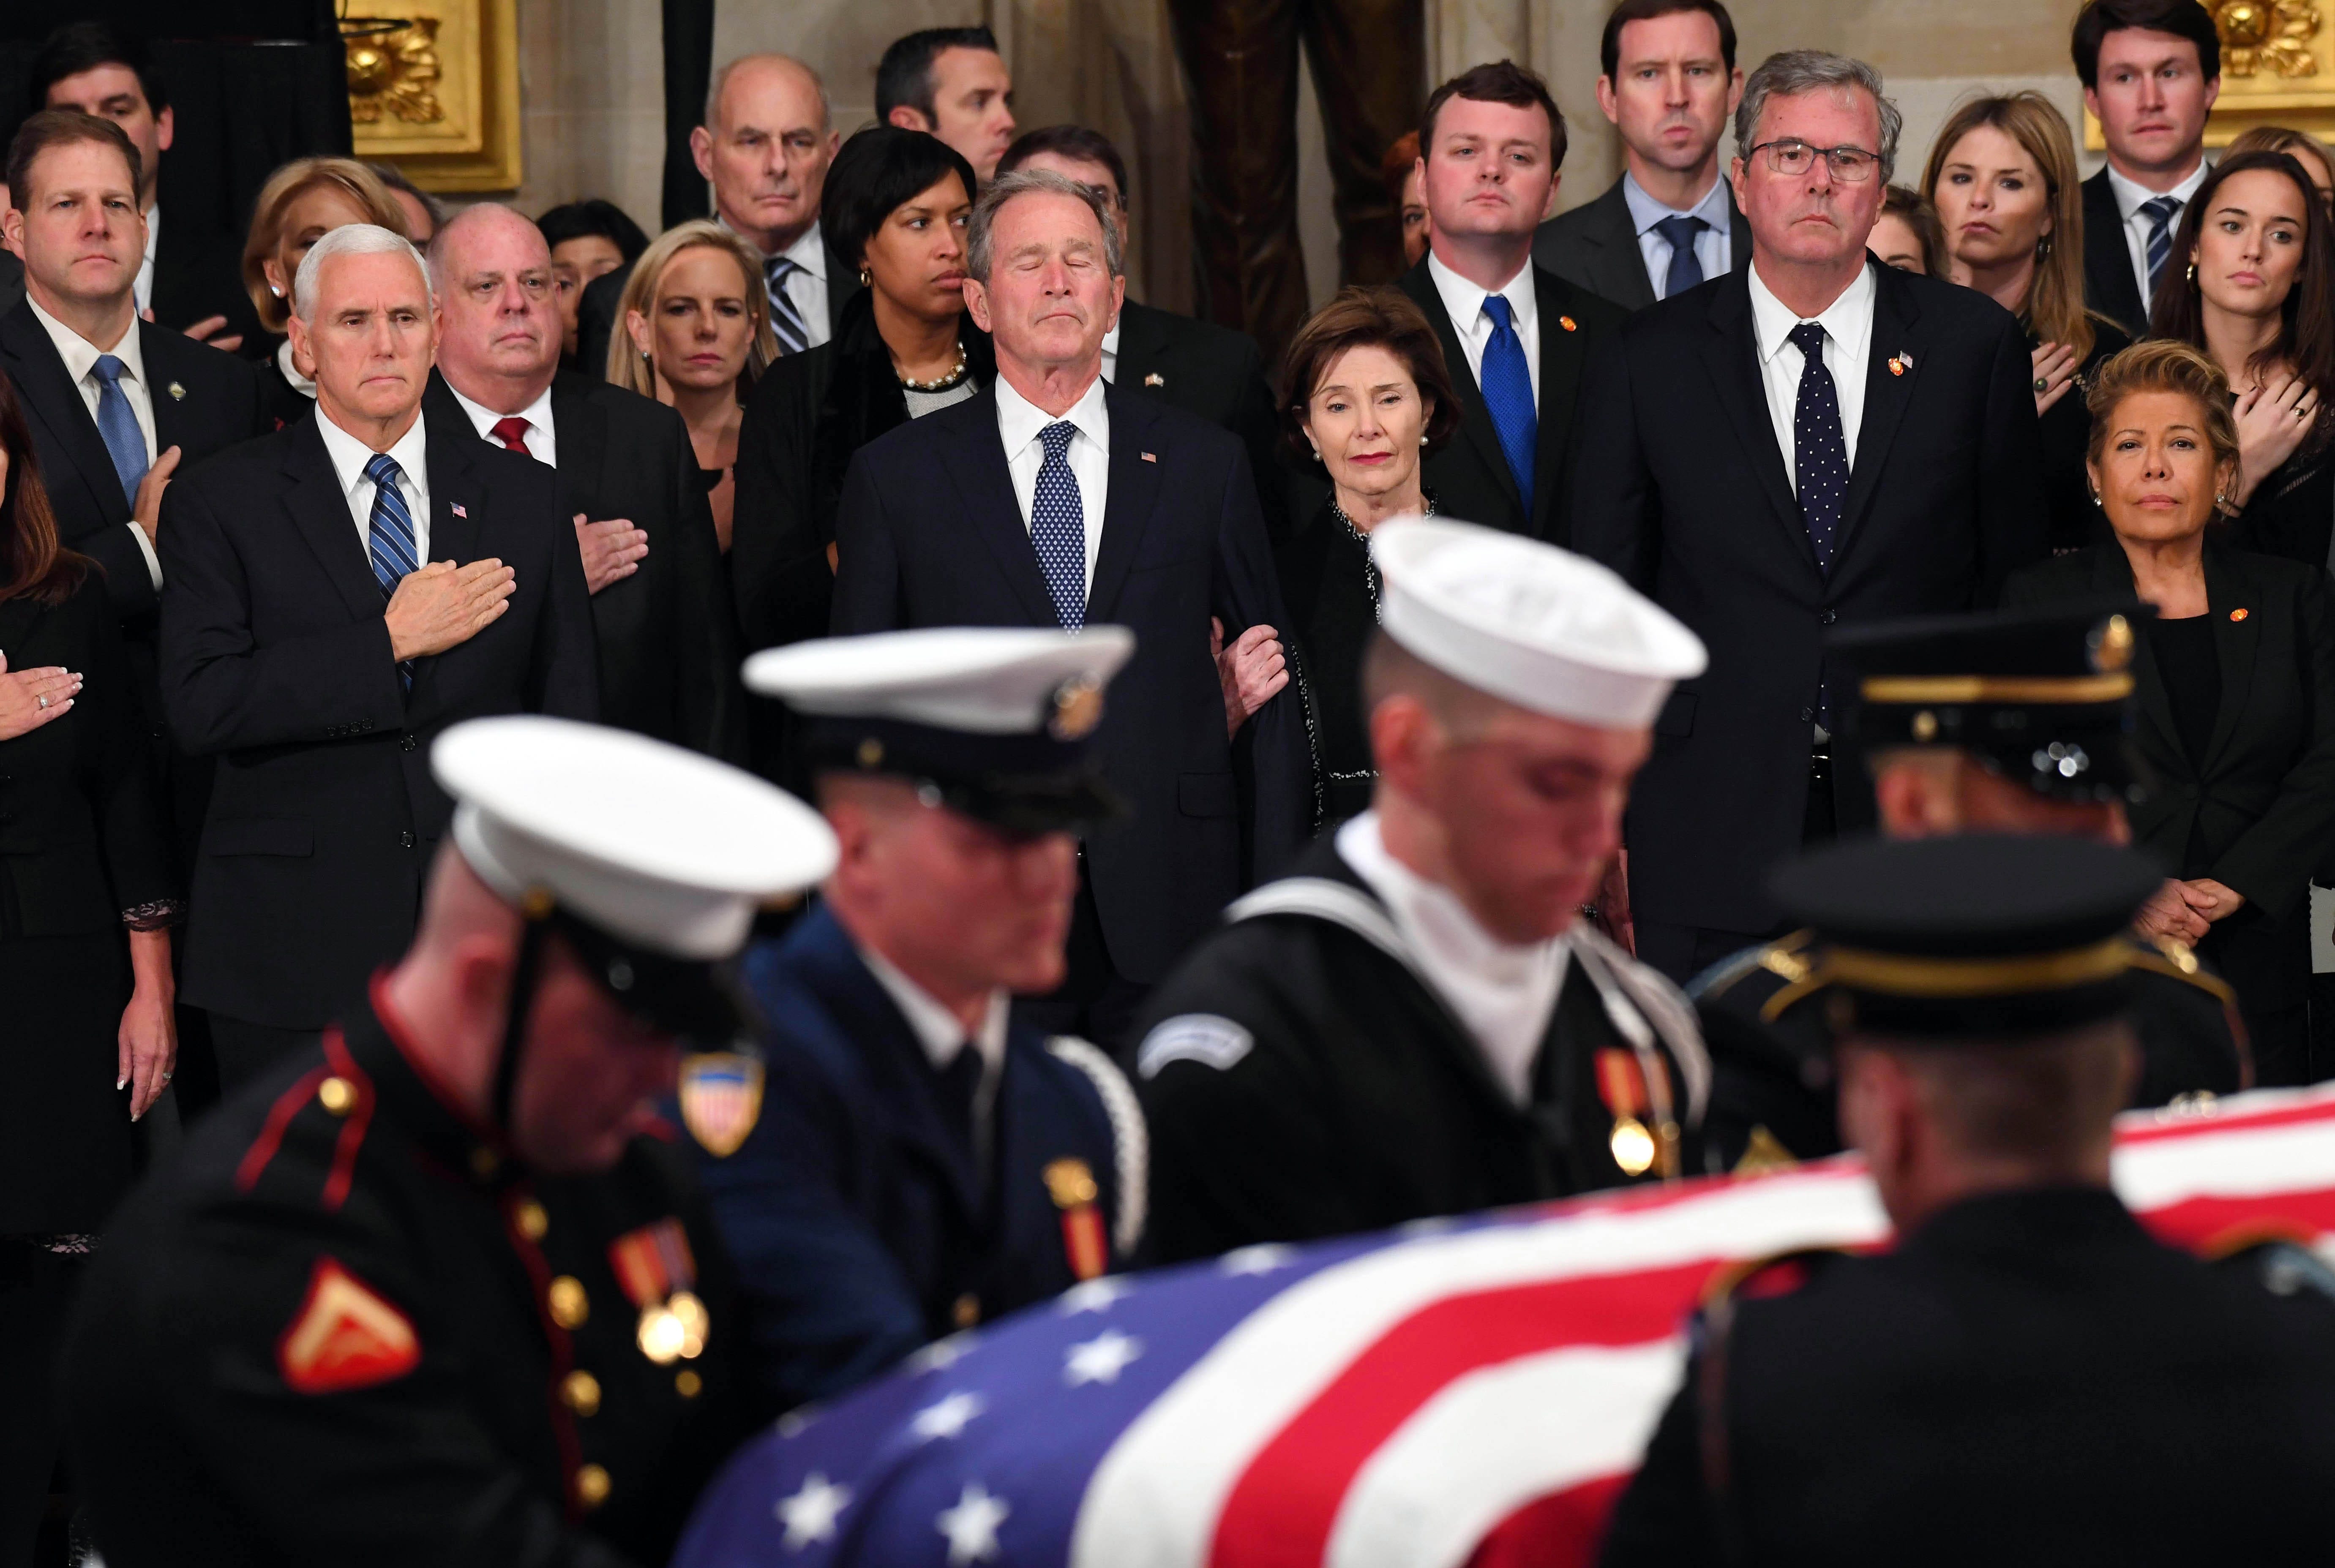 Former President George W. Bush and his wife Laura Bush look on as Former President George H.W. Bush arrives to lie in state at the U.S. Capitol Rotunda on Dec. 3, 2018 . Since President Washington's death, the loss of one of its former leaders has united America in a way few other events can. Americans tend to put political animosity aside and to momentarily forgive a president's faults, to honor the fallen leader and to celebrate the shared history reflected in his time in office.